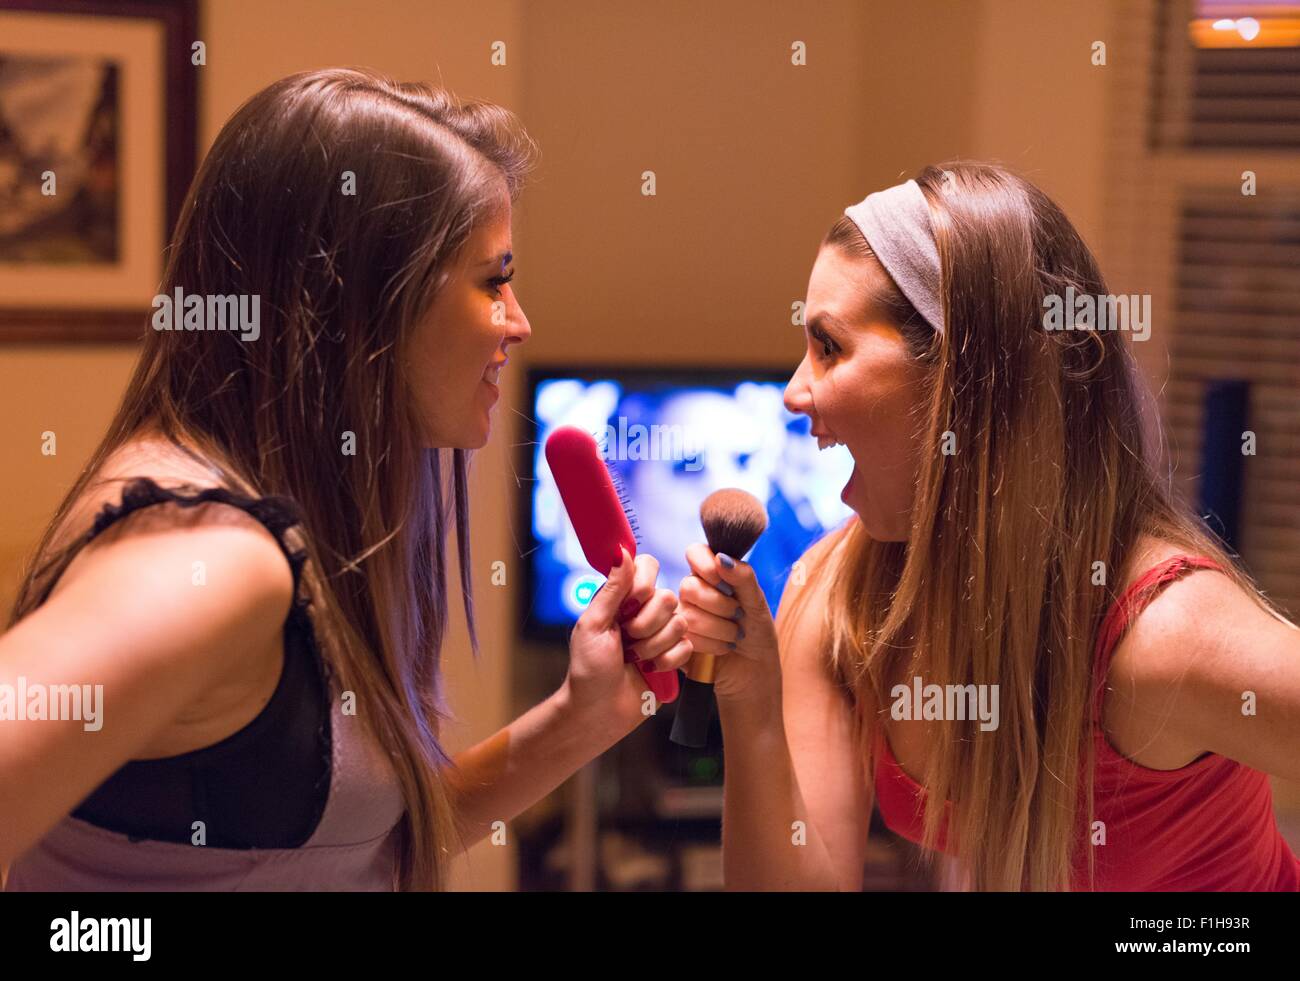 Two young women, singing into hair and make-up brushes Stock Photo